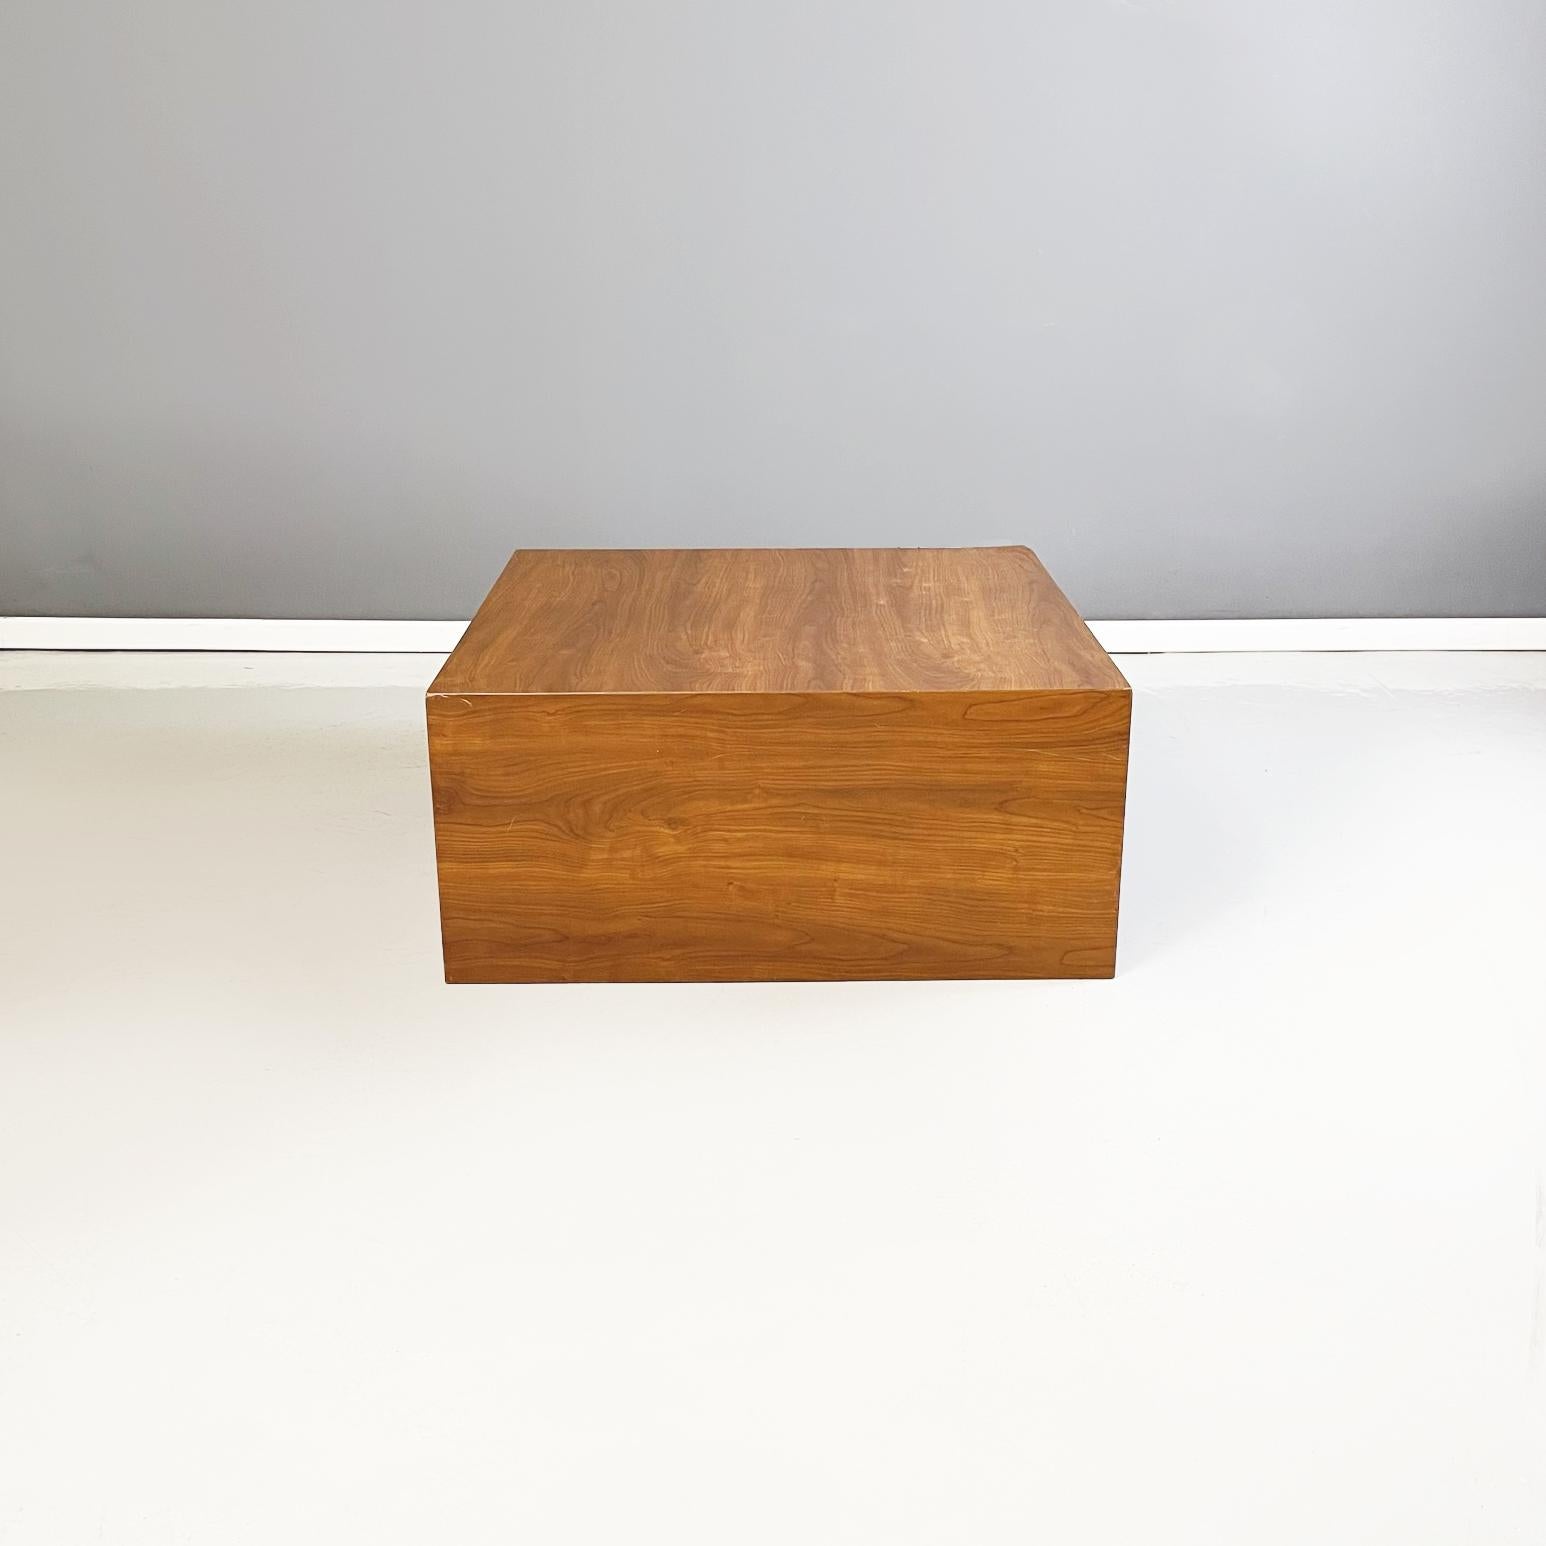 Italian Modern Wooden Square Pedestal or Stand Display or Coffe Table, 1970s In Good Condition For Sale In MIlano, IT